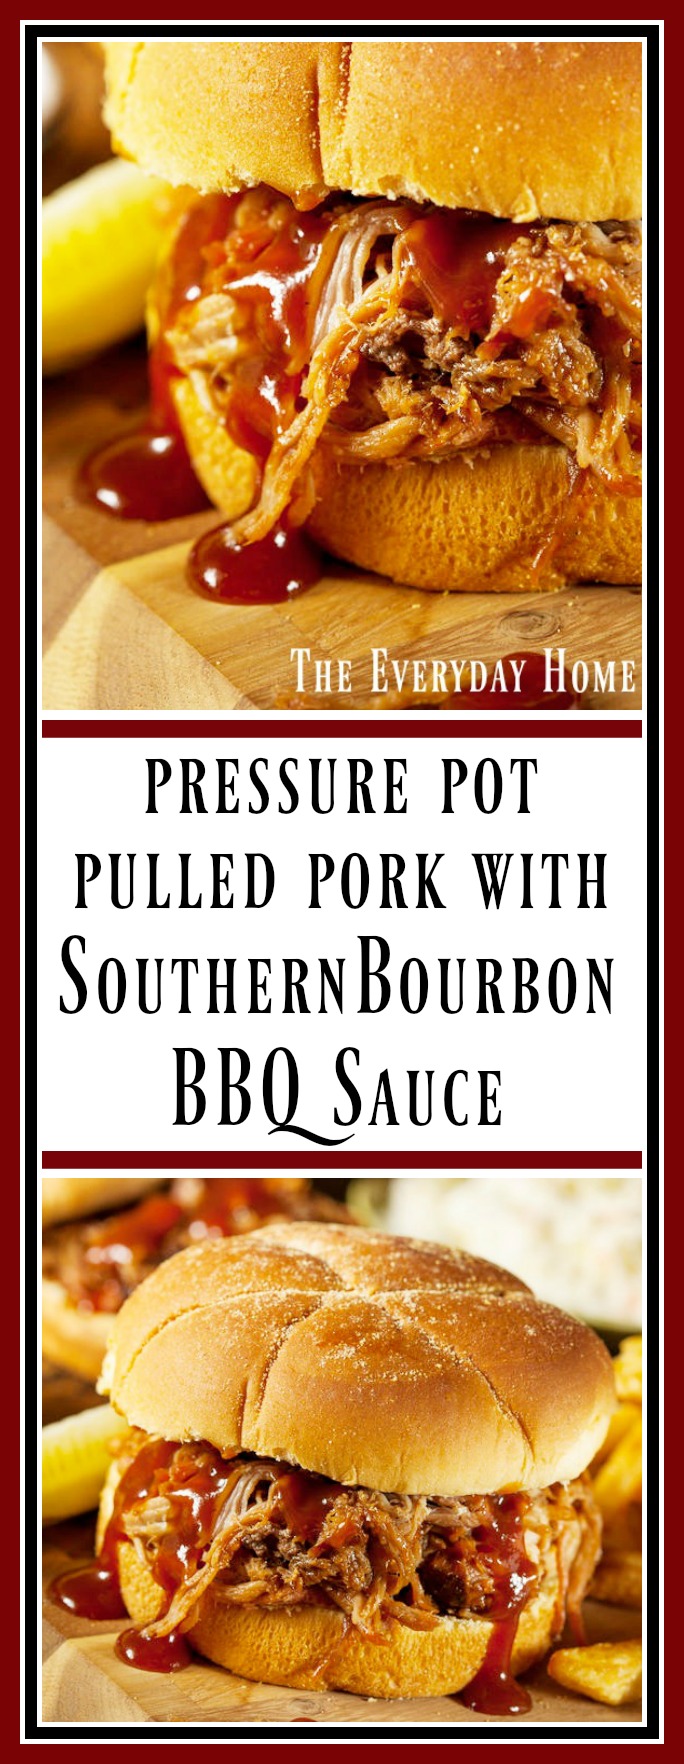 Pulled Pork with Southern Bourbon BBQ Sauce || The Everyday Home || www.everydayhomeblog.com